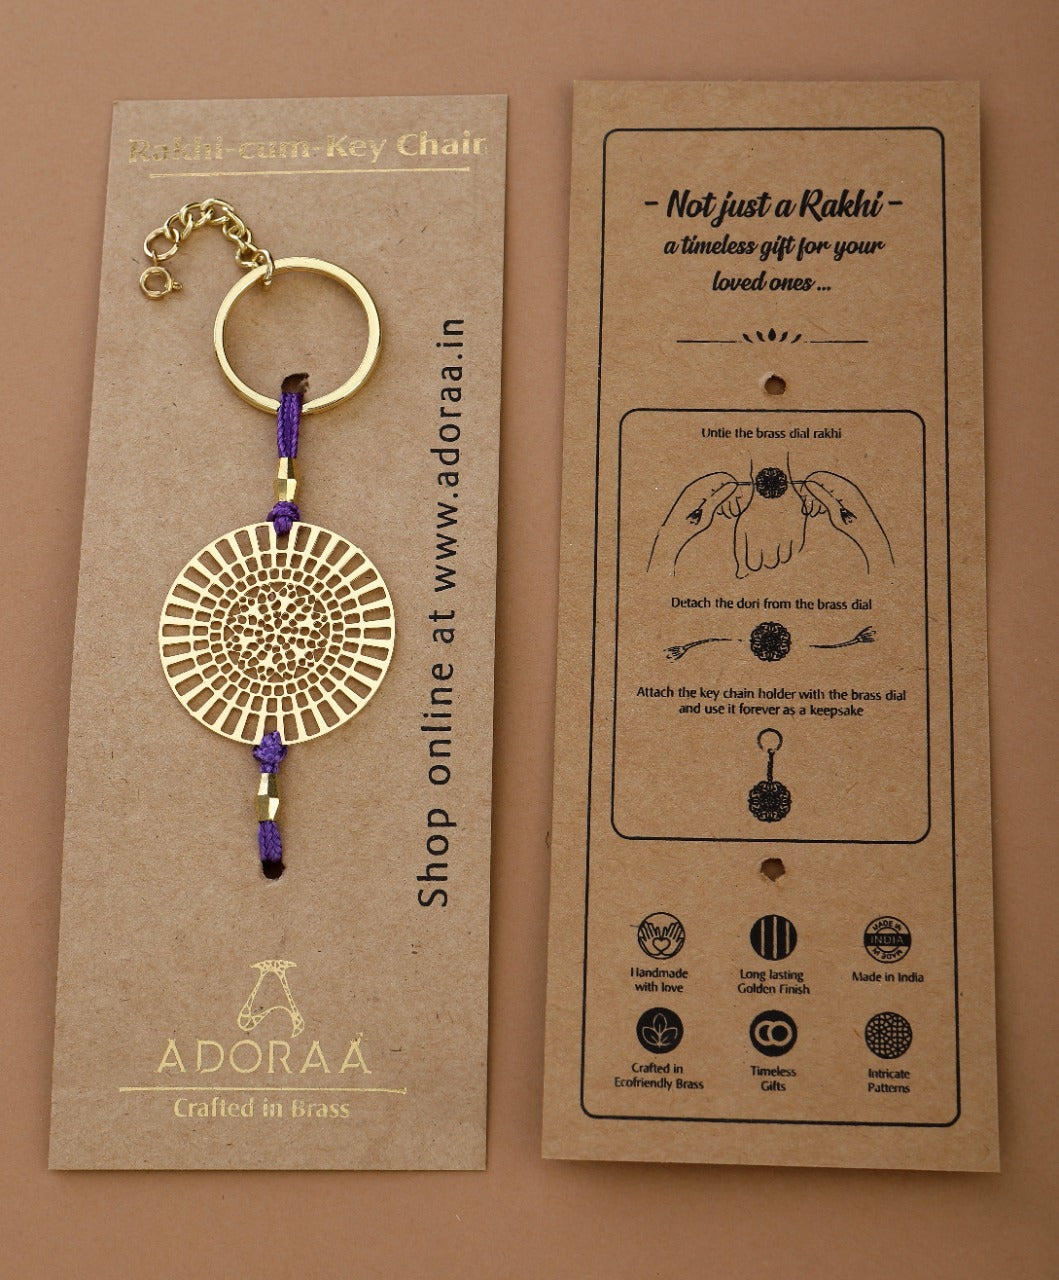 Dial design Rakhi cum keychain ring for Bhai/brother crafted in brass with golden finish